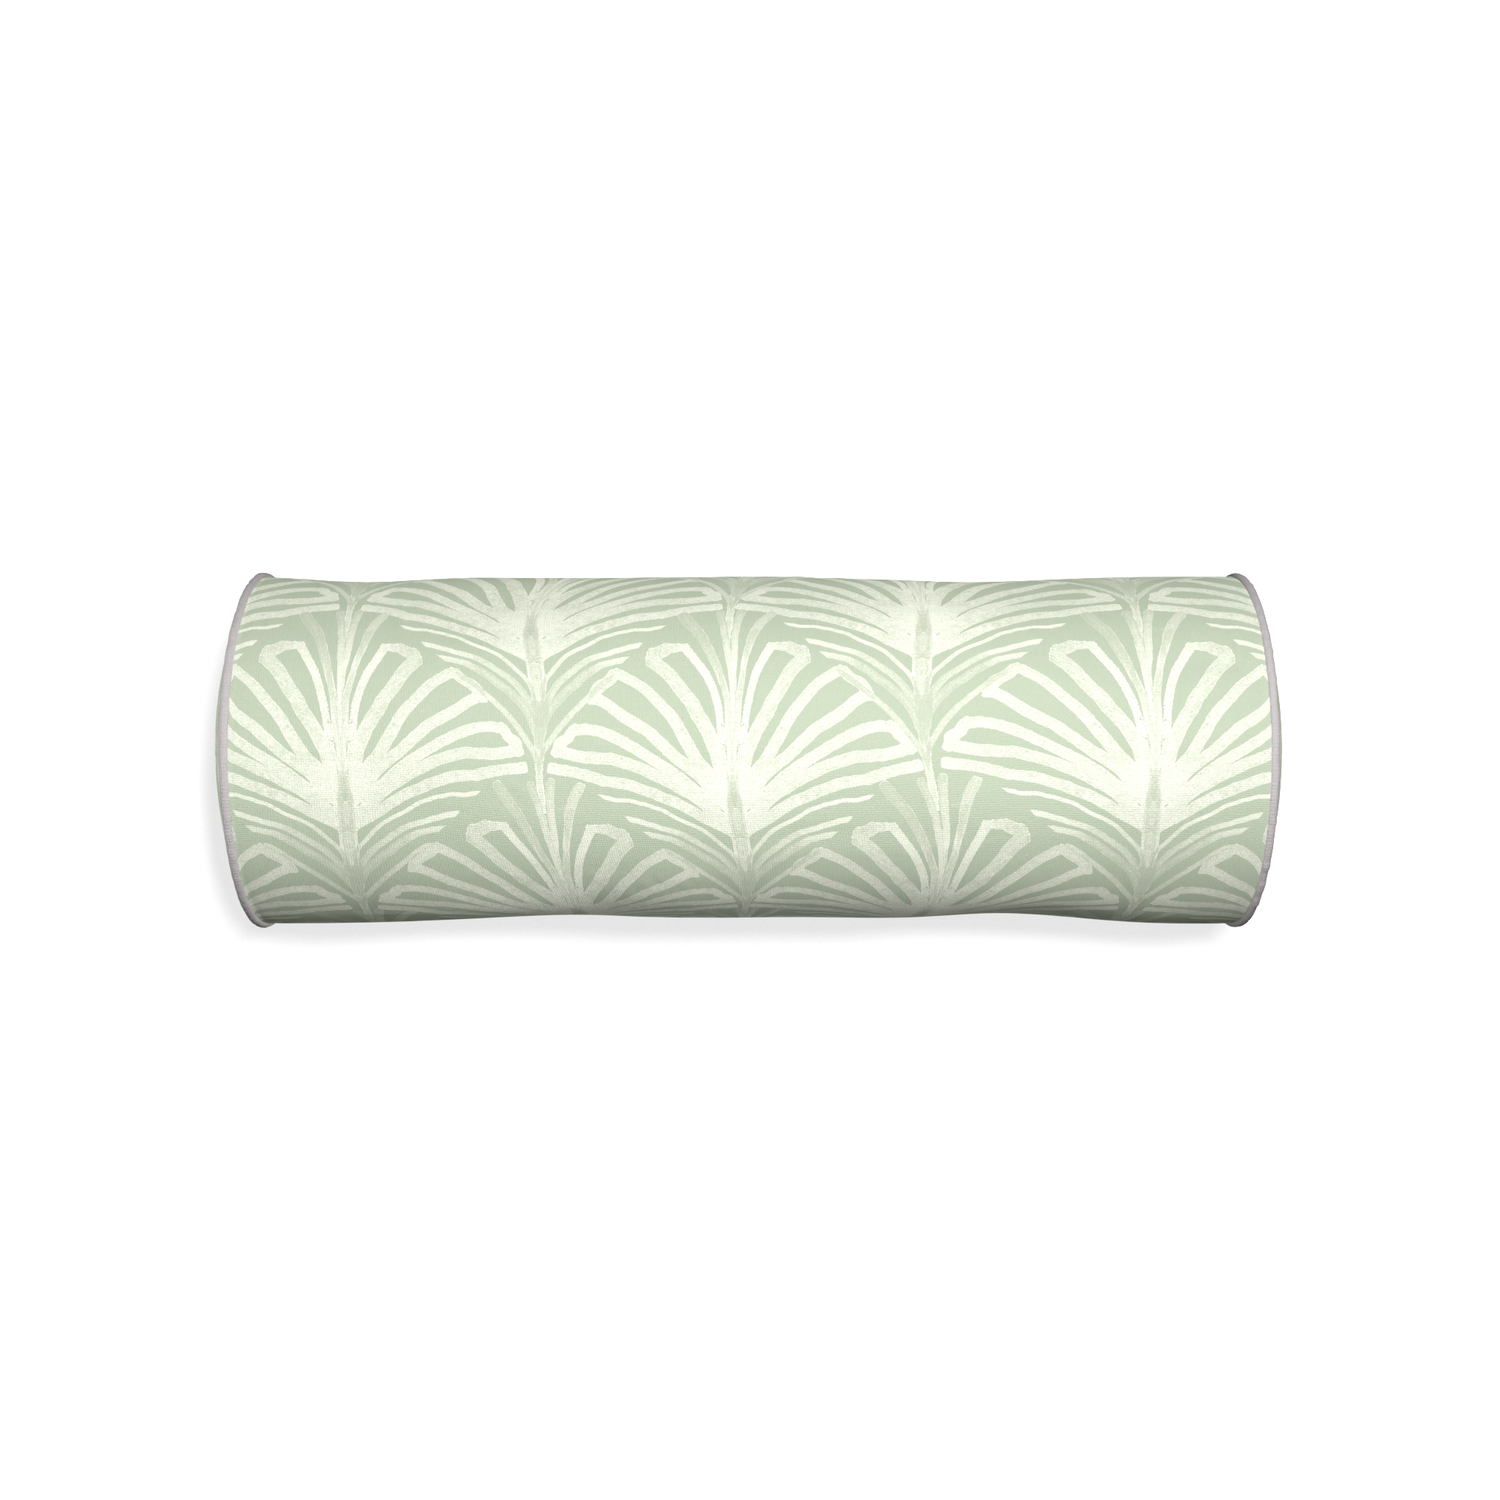 Bolster suzy sage custom pillow with pebble piping on white background